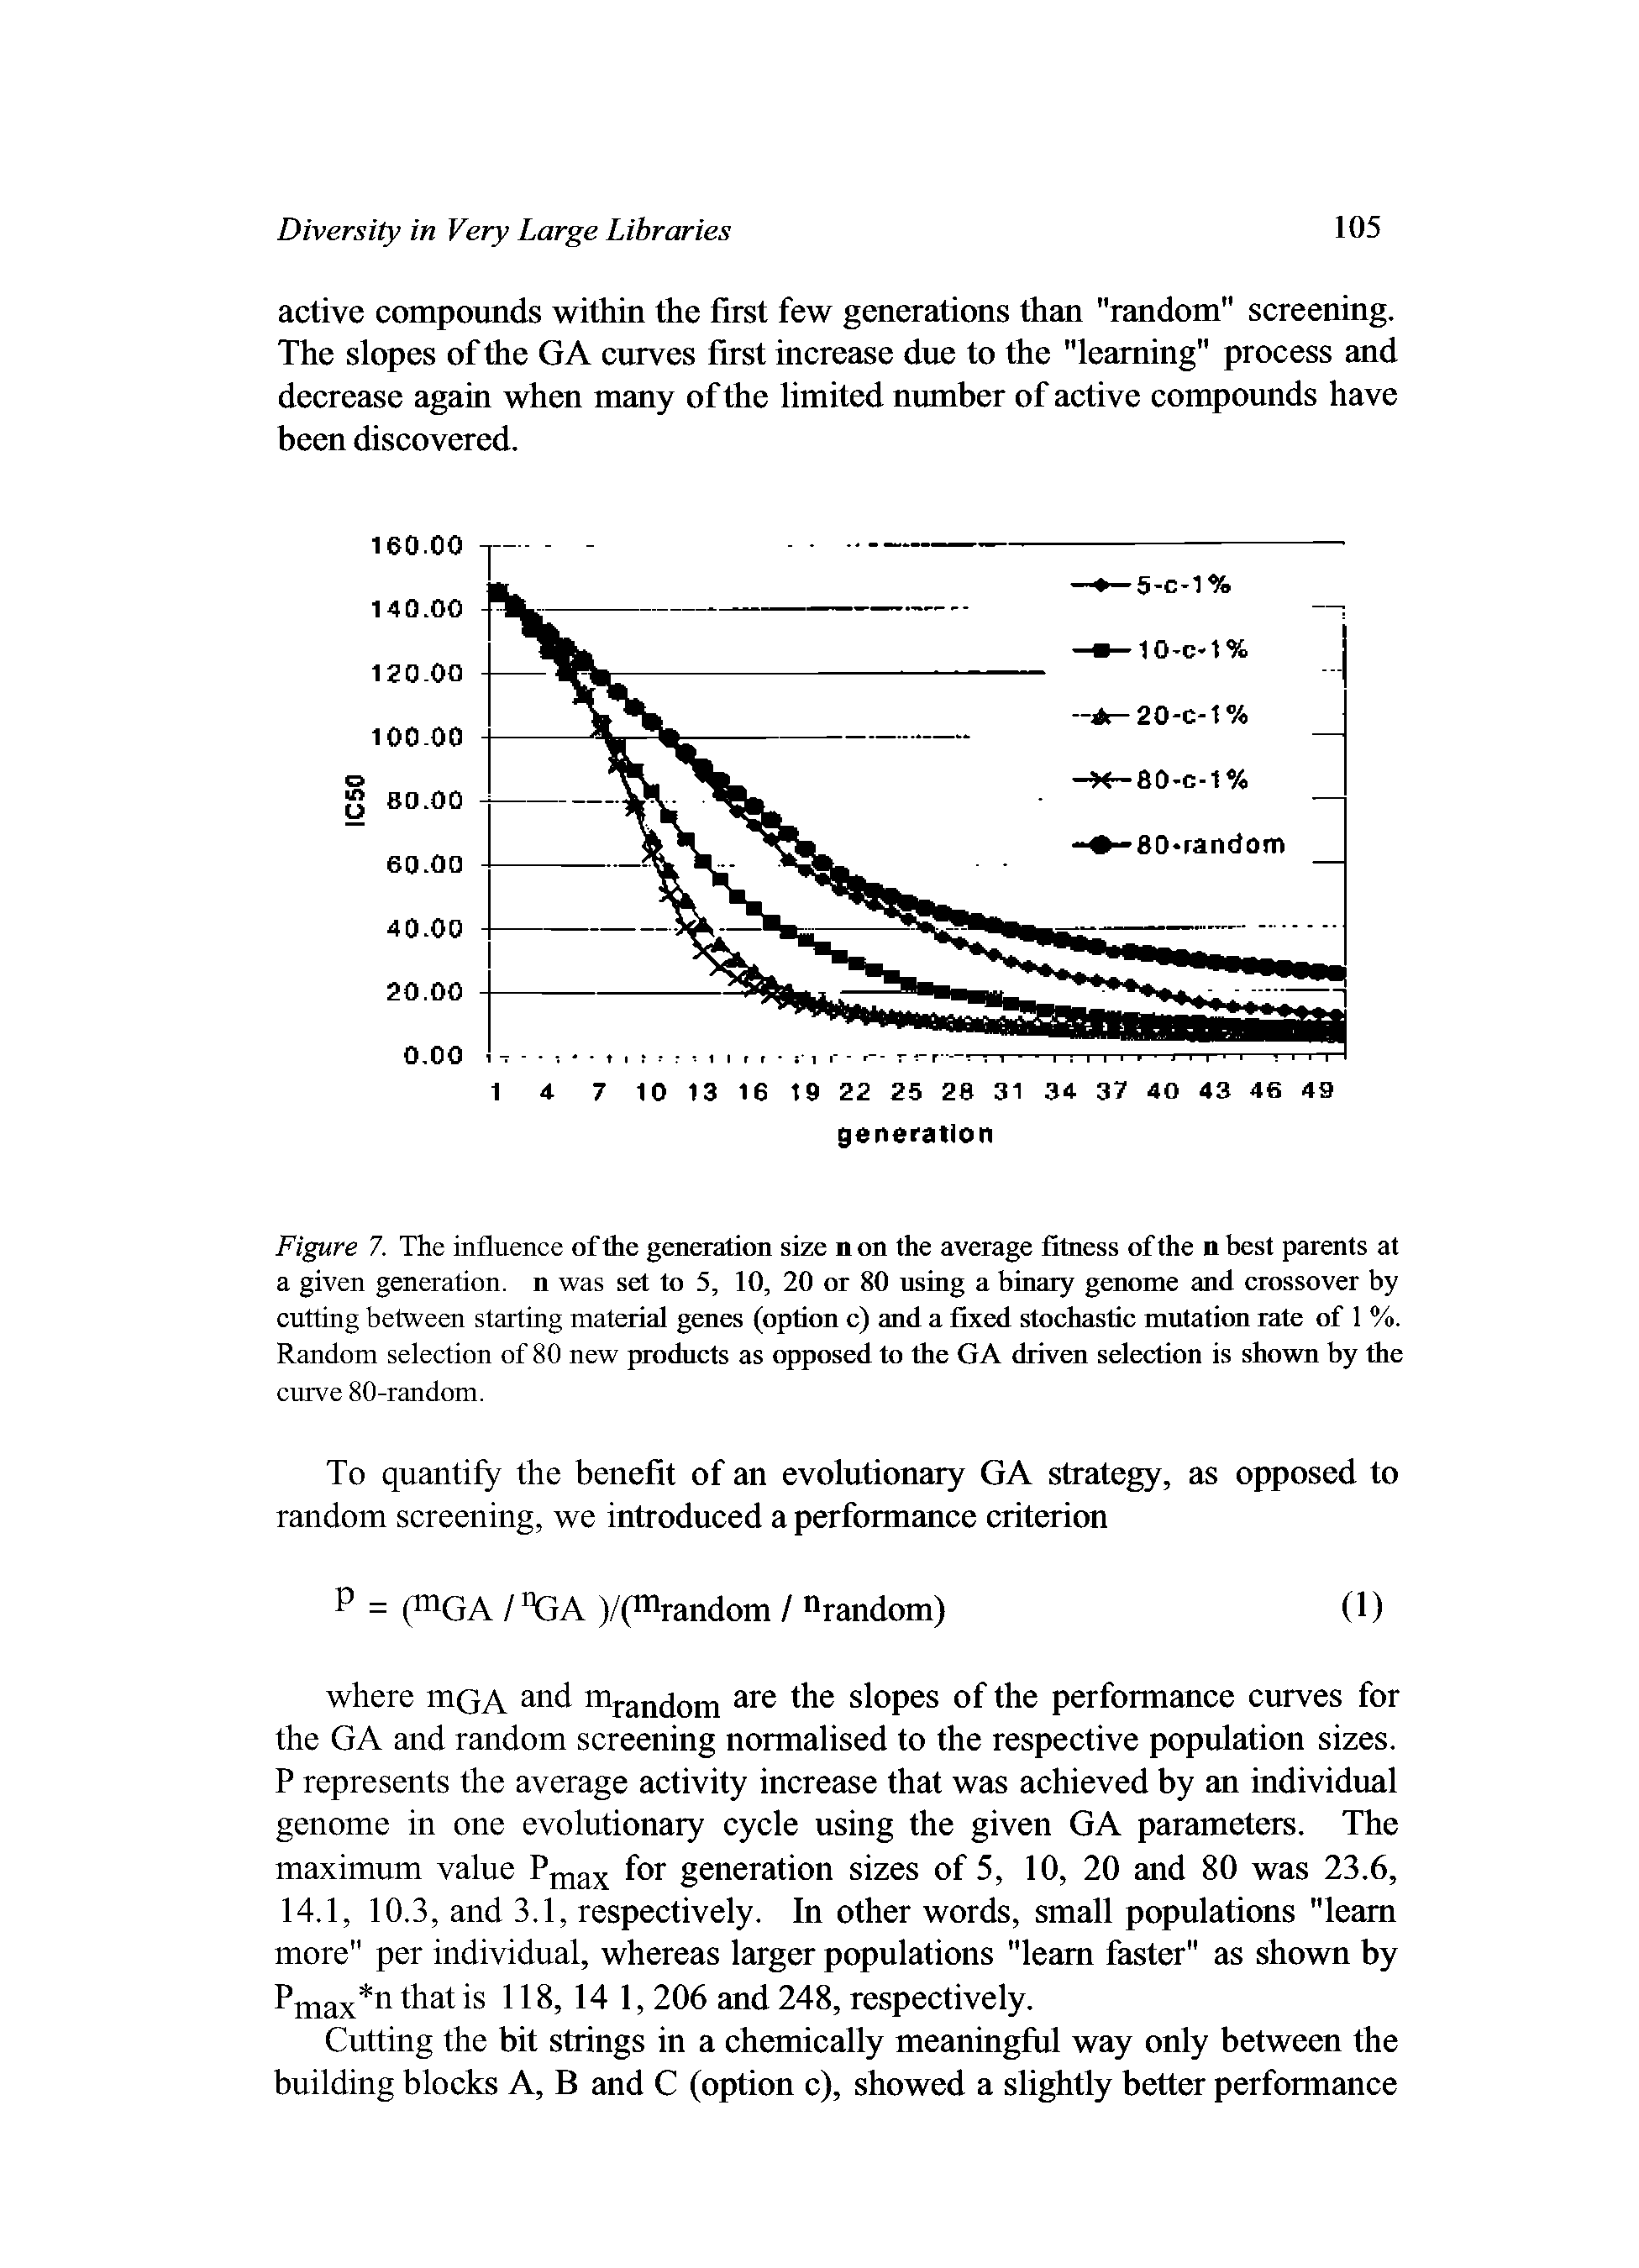 Figure 7. The influence of the generation size non the average fitness of the nbest parents at a given generation, n was set to 5, 10, 20 or 80 using a binary genome and crossover by cutting between starting material genes (option c) and a fixed stochastic mutation rate of 1 %. Random selection of 80 new products as opposed to the GA driven selection is shown by the...